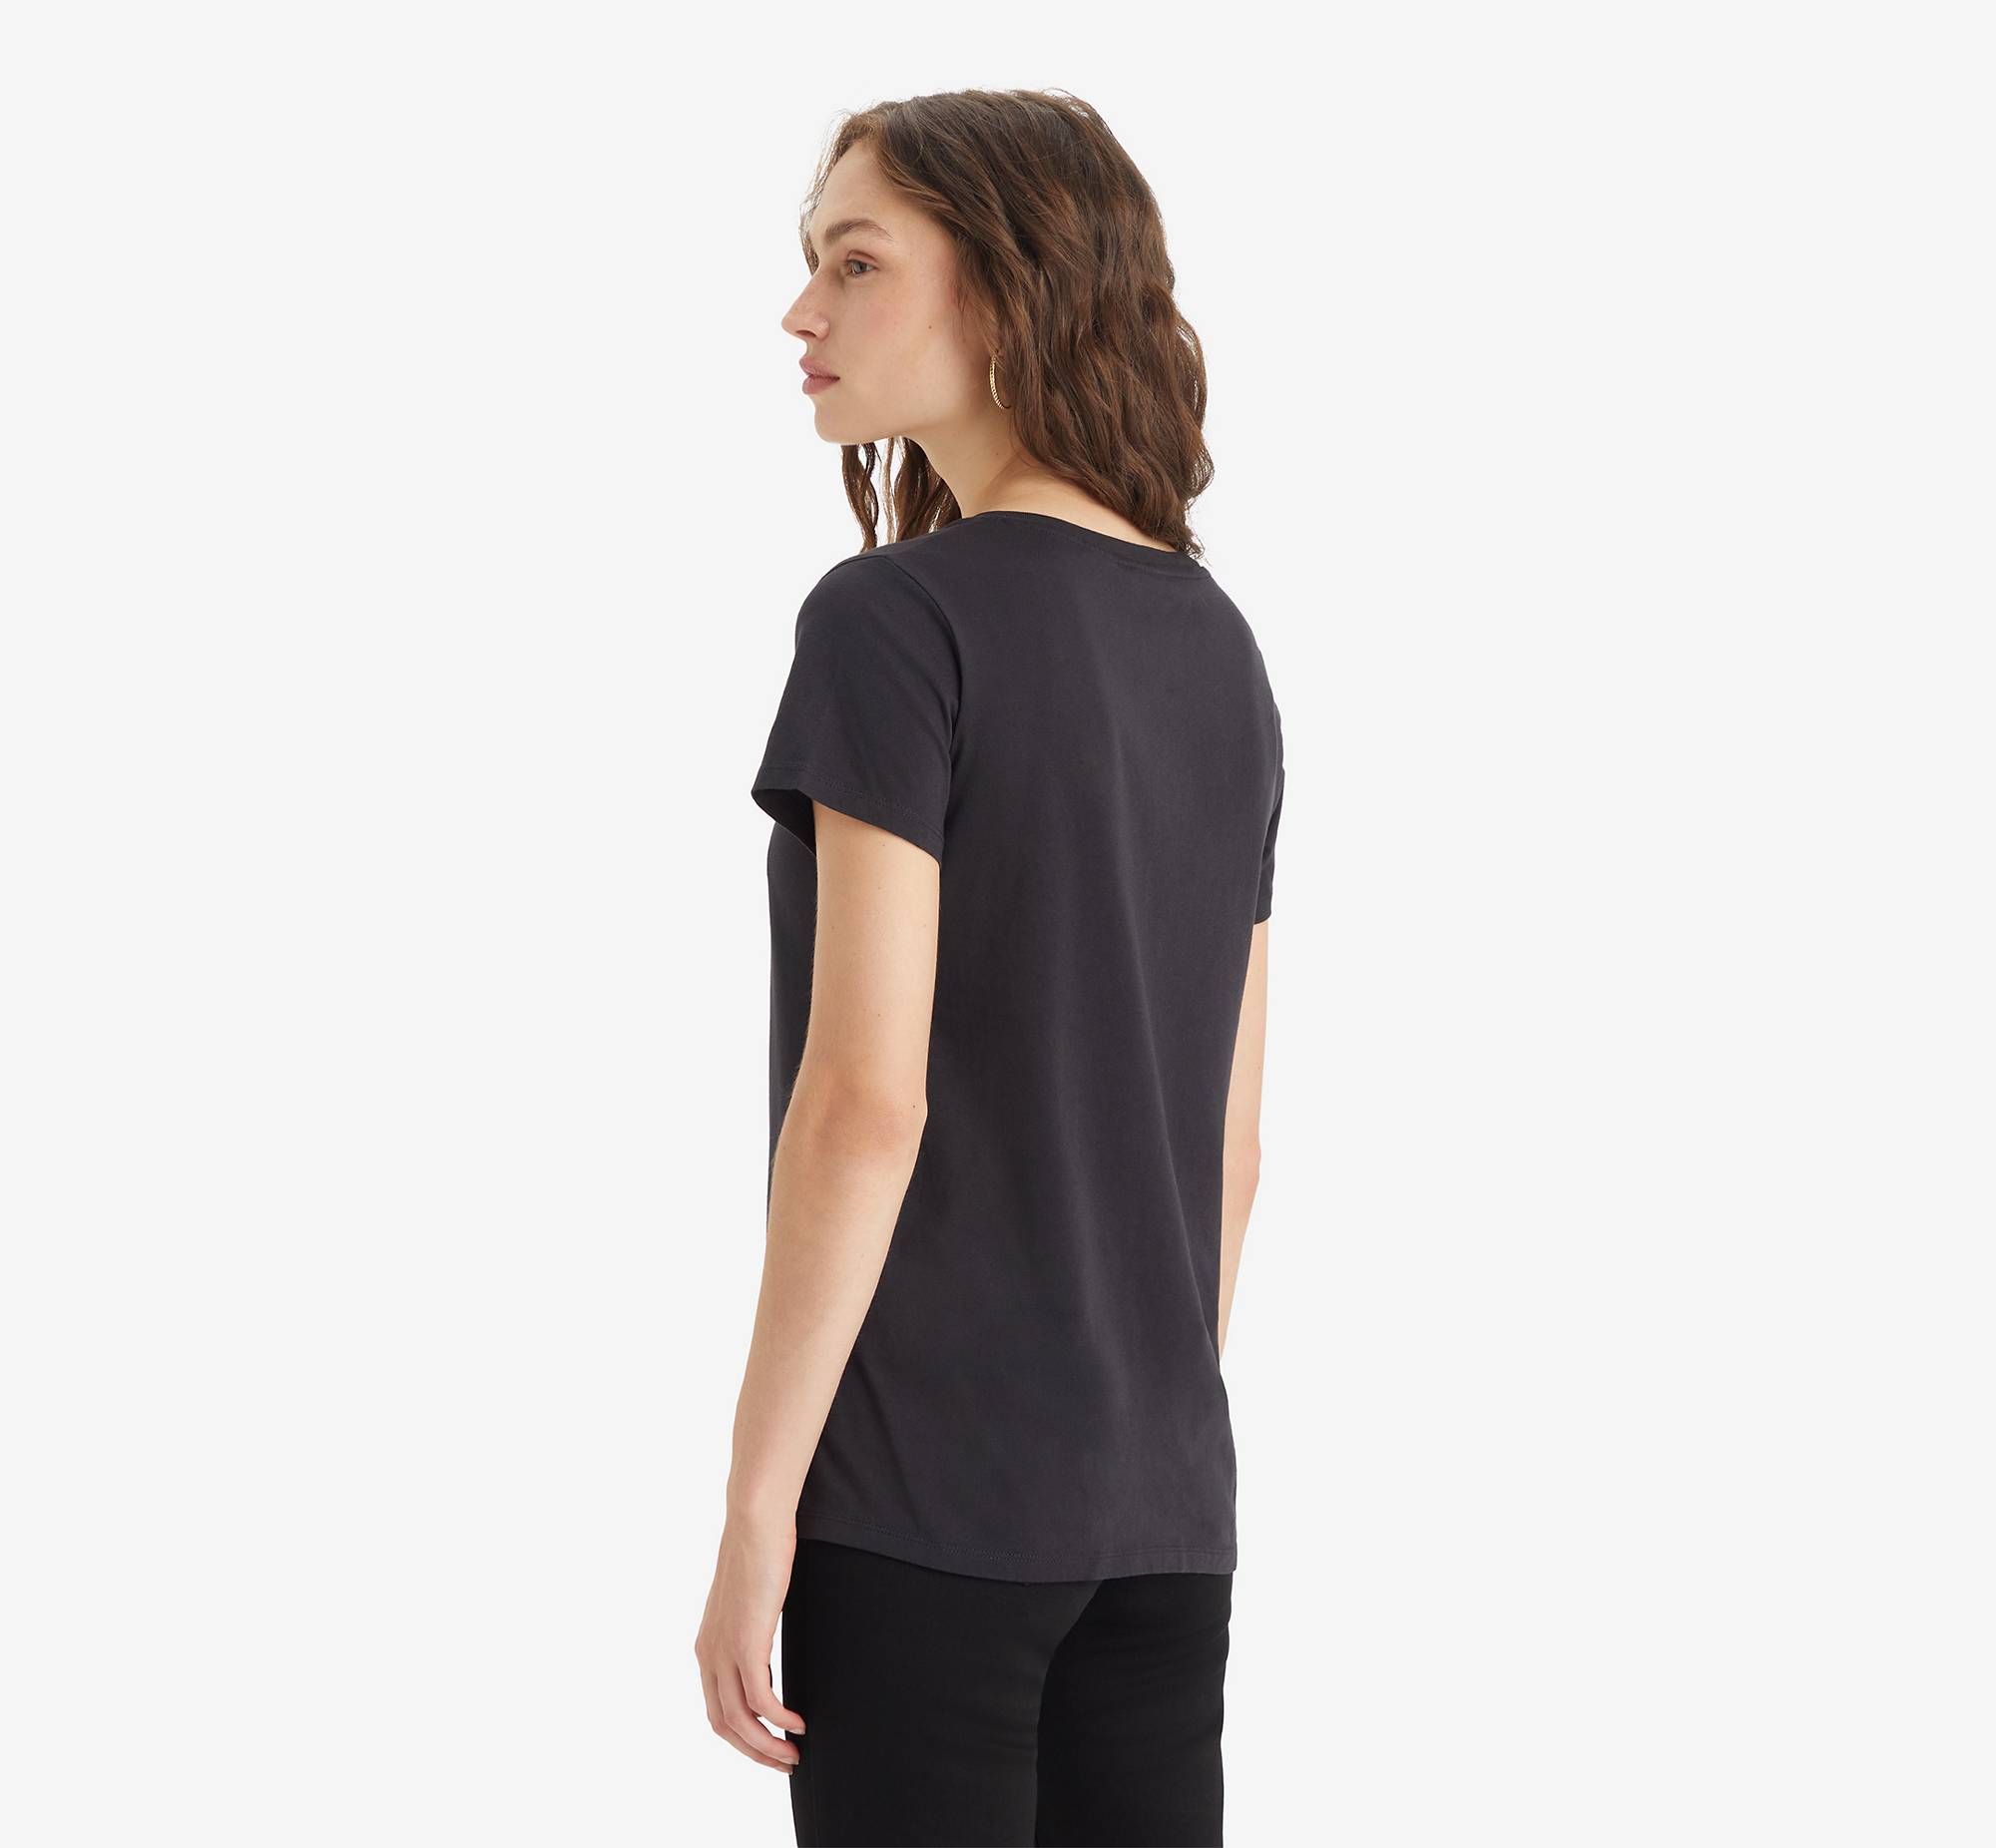 The Perfect Tee V-Neck 2